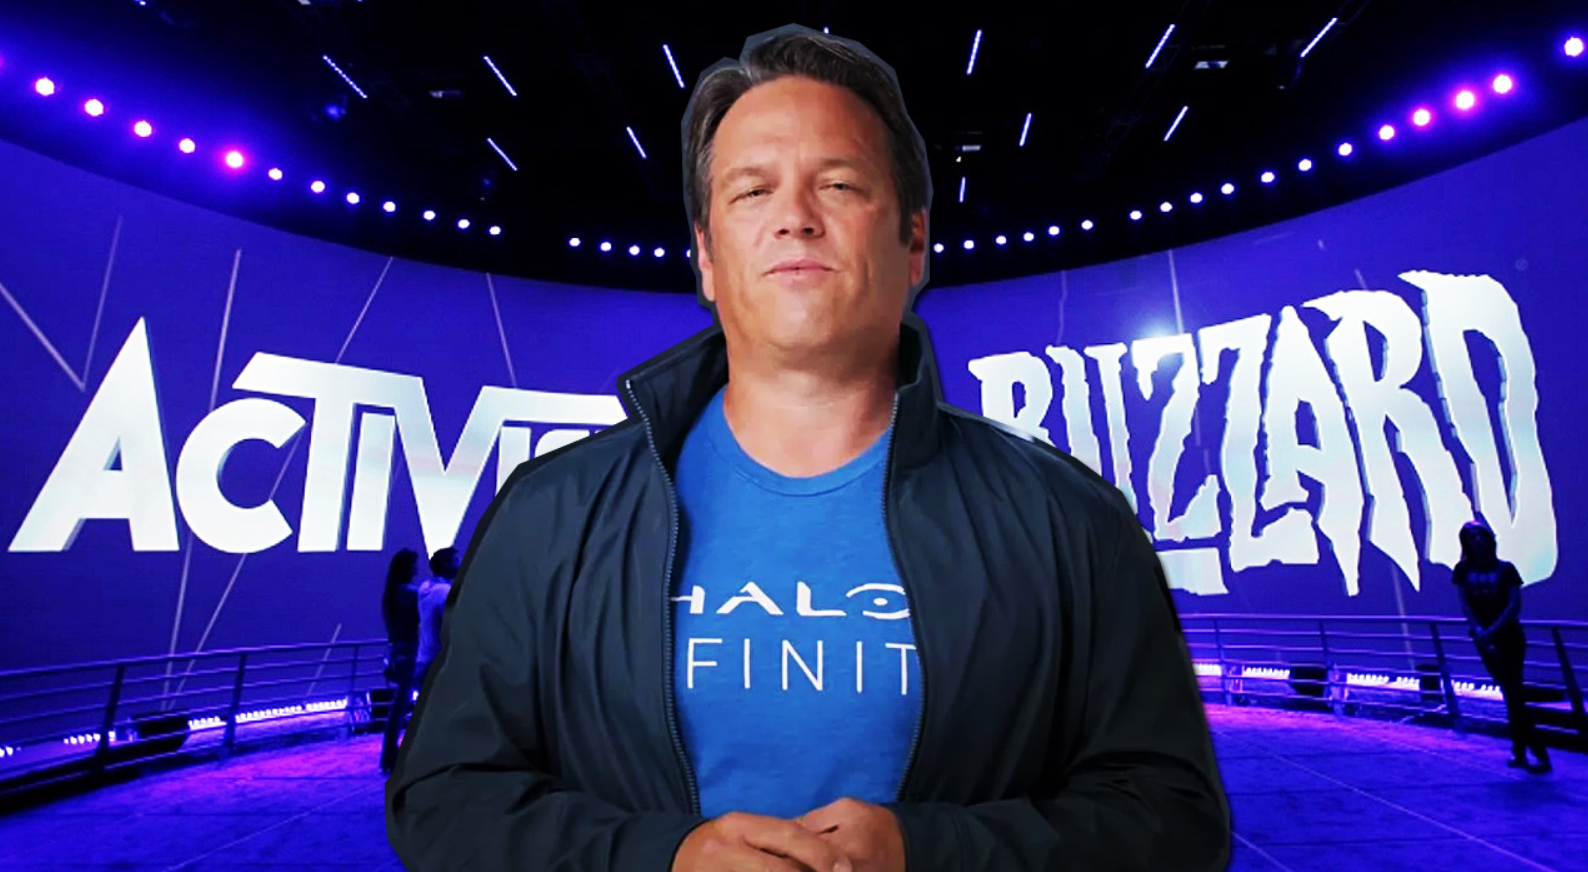 Phil Spencer wearing a Halo Infinite shirt with Activision Blizzard behind him